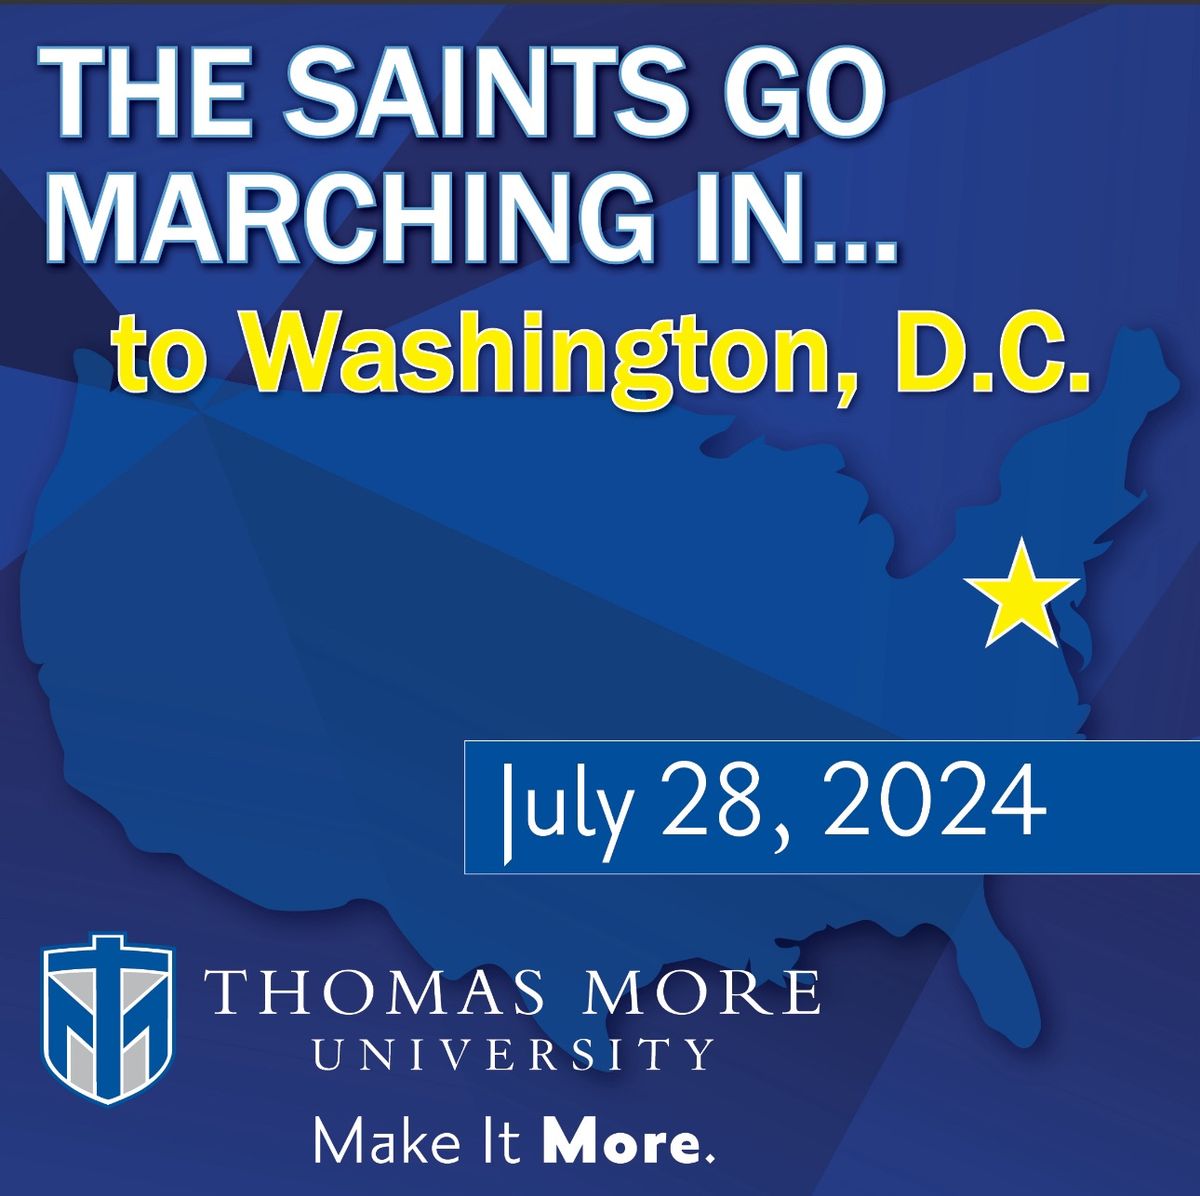 The Saints Go Marching In\u2026 to Washington D.C.!